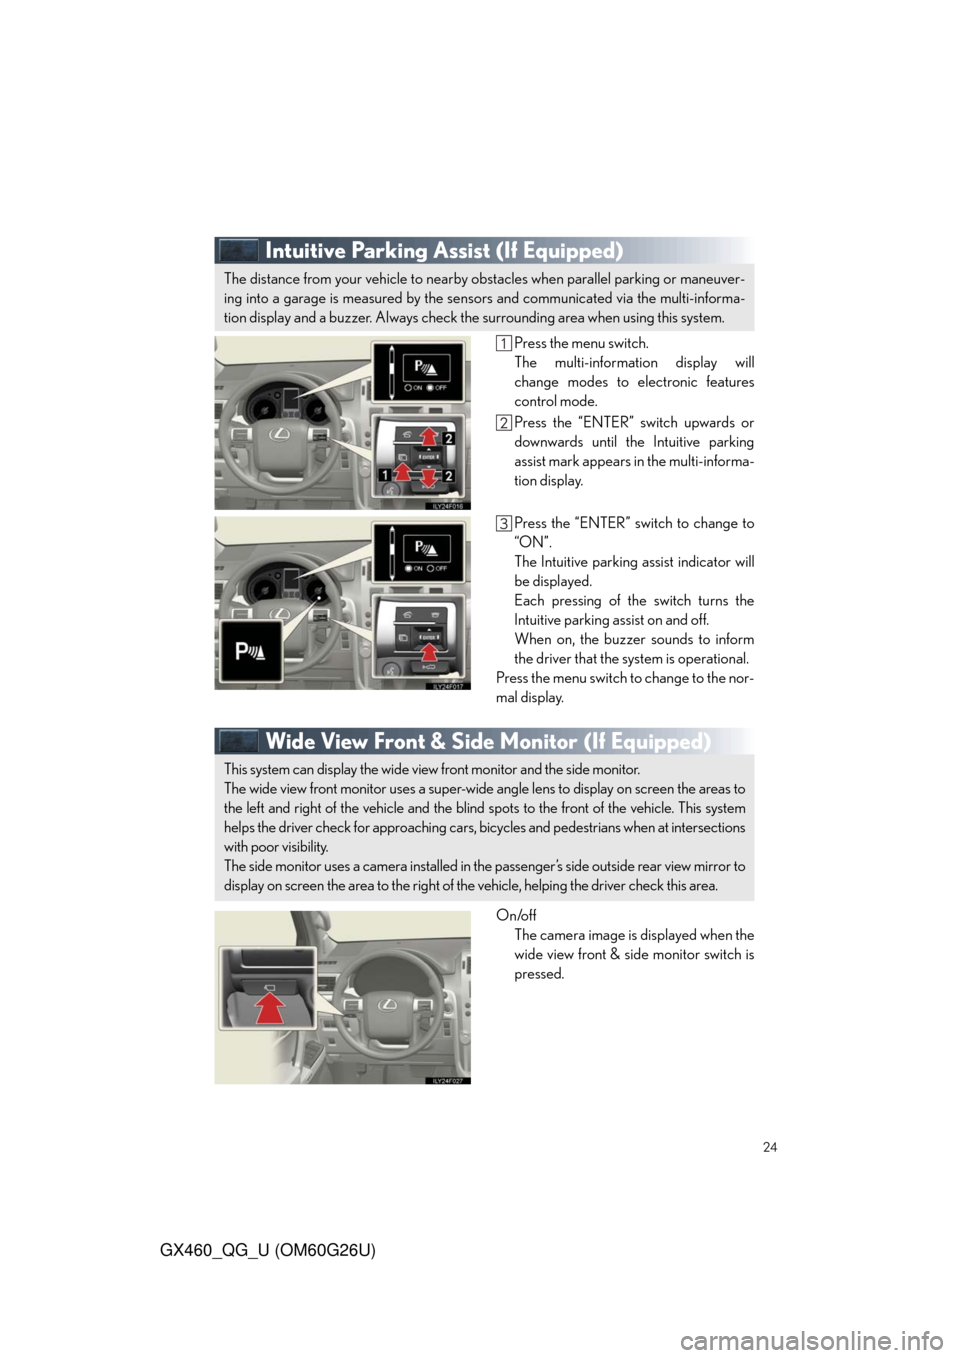 Lexus GX460 2011  Operating Other Driving Systems / LEXUS 2011 GX460 OWNERS MANUAL QUICK GUIDE (OM60G26U) 24
GX460_QG_U (OM60G26U)
Intuitive Parking Assist (If Equipped)
Press the menu switch.
The multi-information display will
change modes to electronic features
control mode.
Press the “ENTER” switch